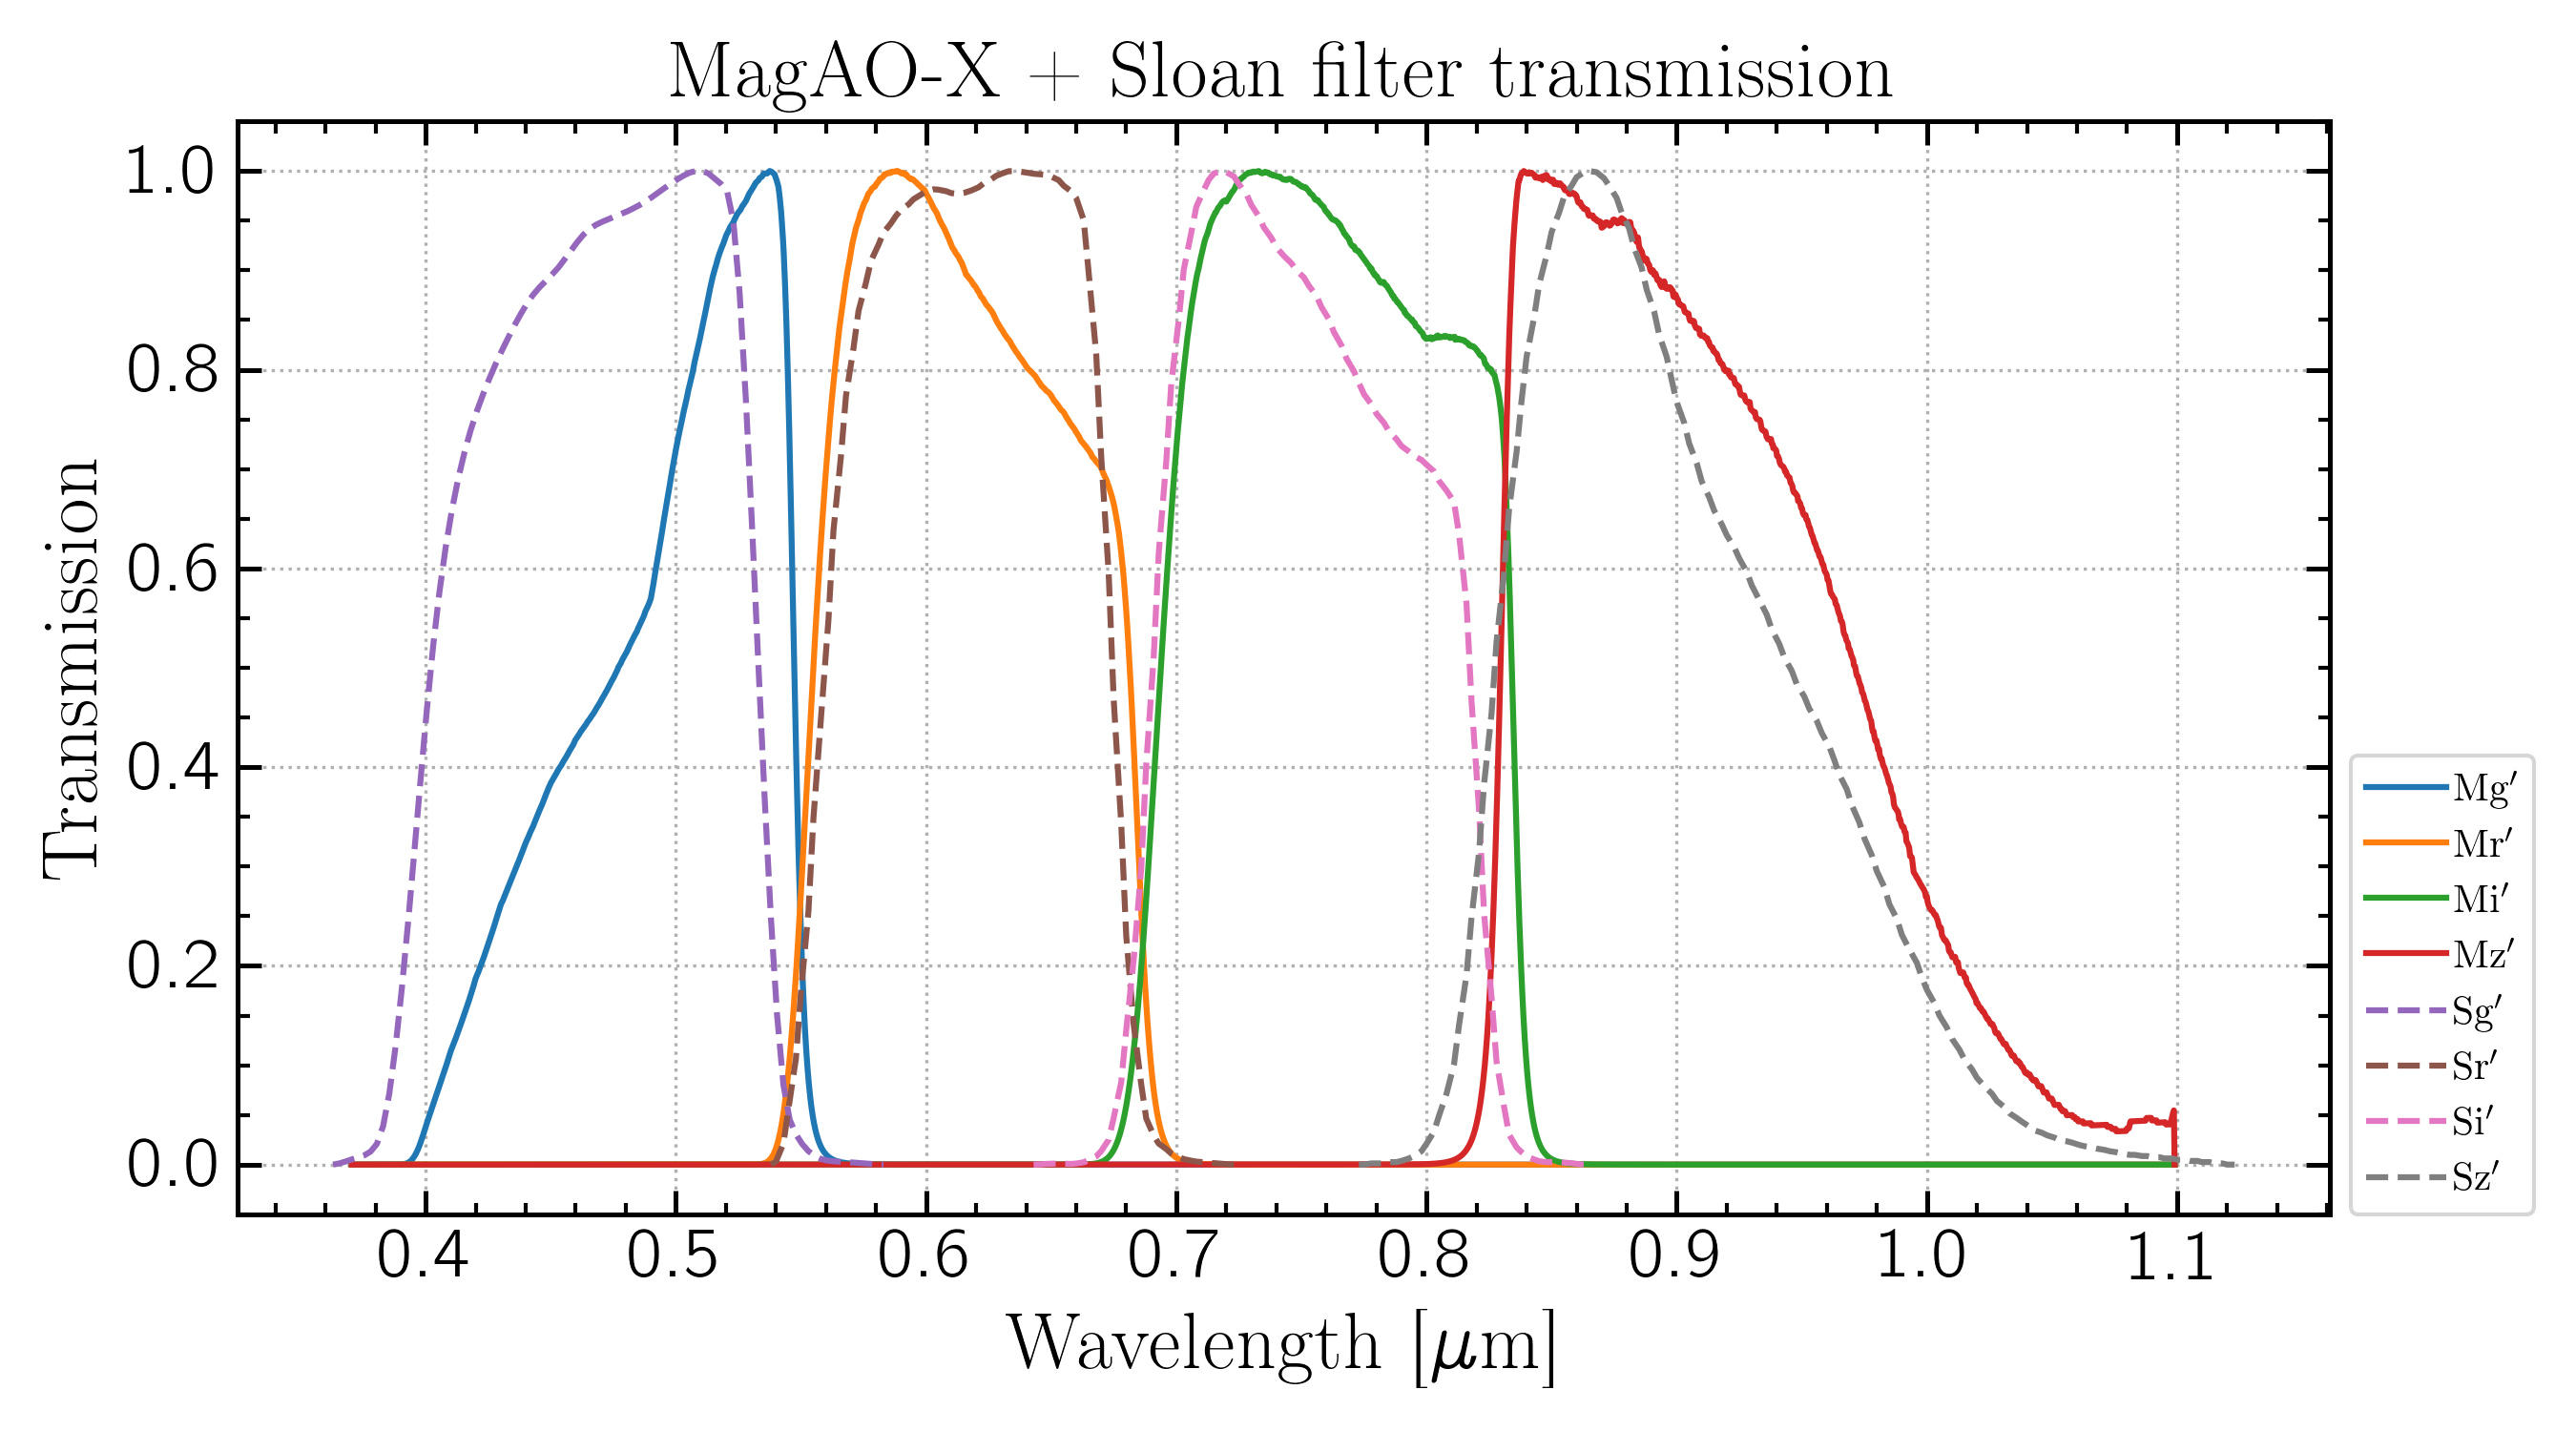 Plot of MagAO-X and Sloan filter transmission curves